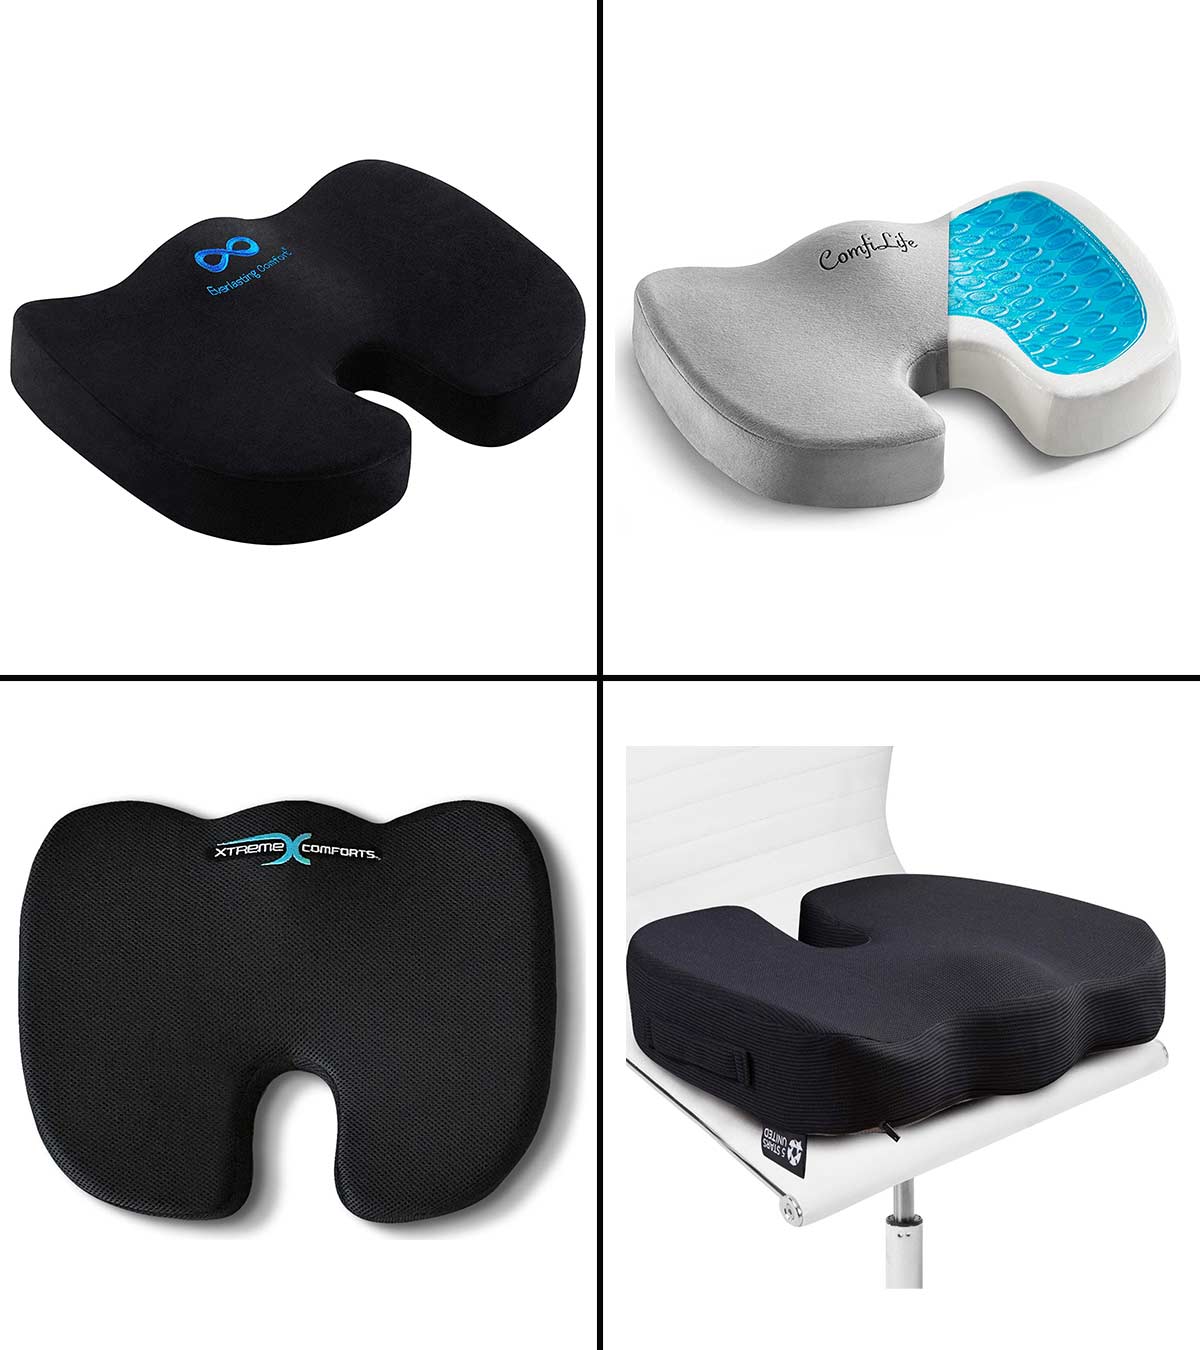 https://www.momjunction.com/wp-content/uploads/2020/11/15-Best-Seat-Cushions-For-Sciatica-Pain-Relief-In-2020.jpg